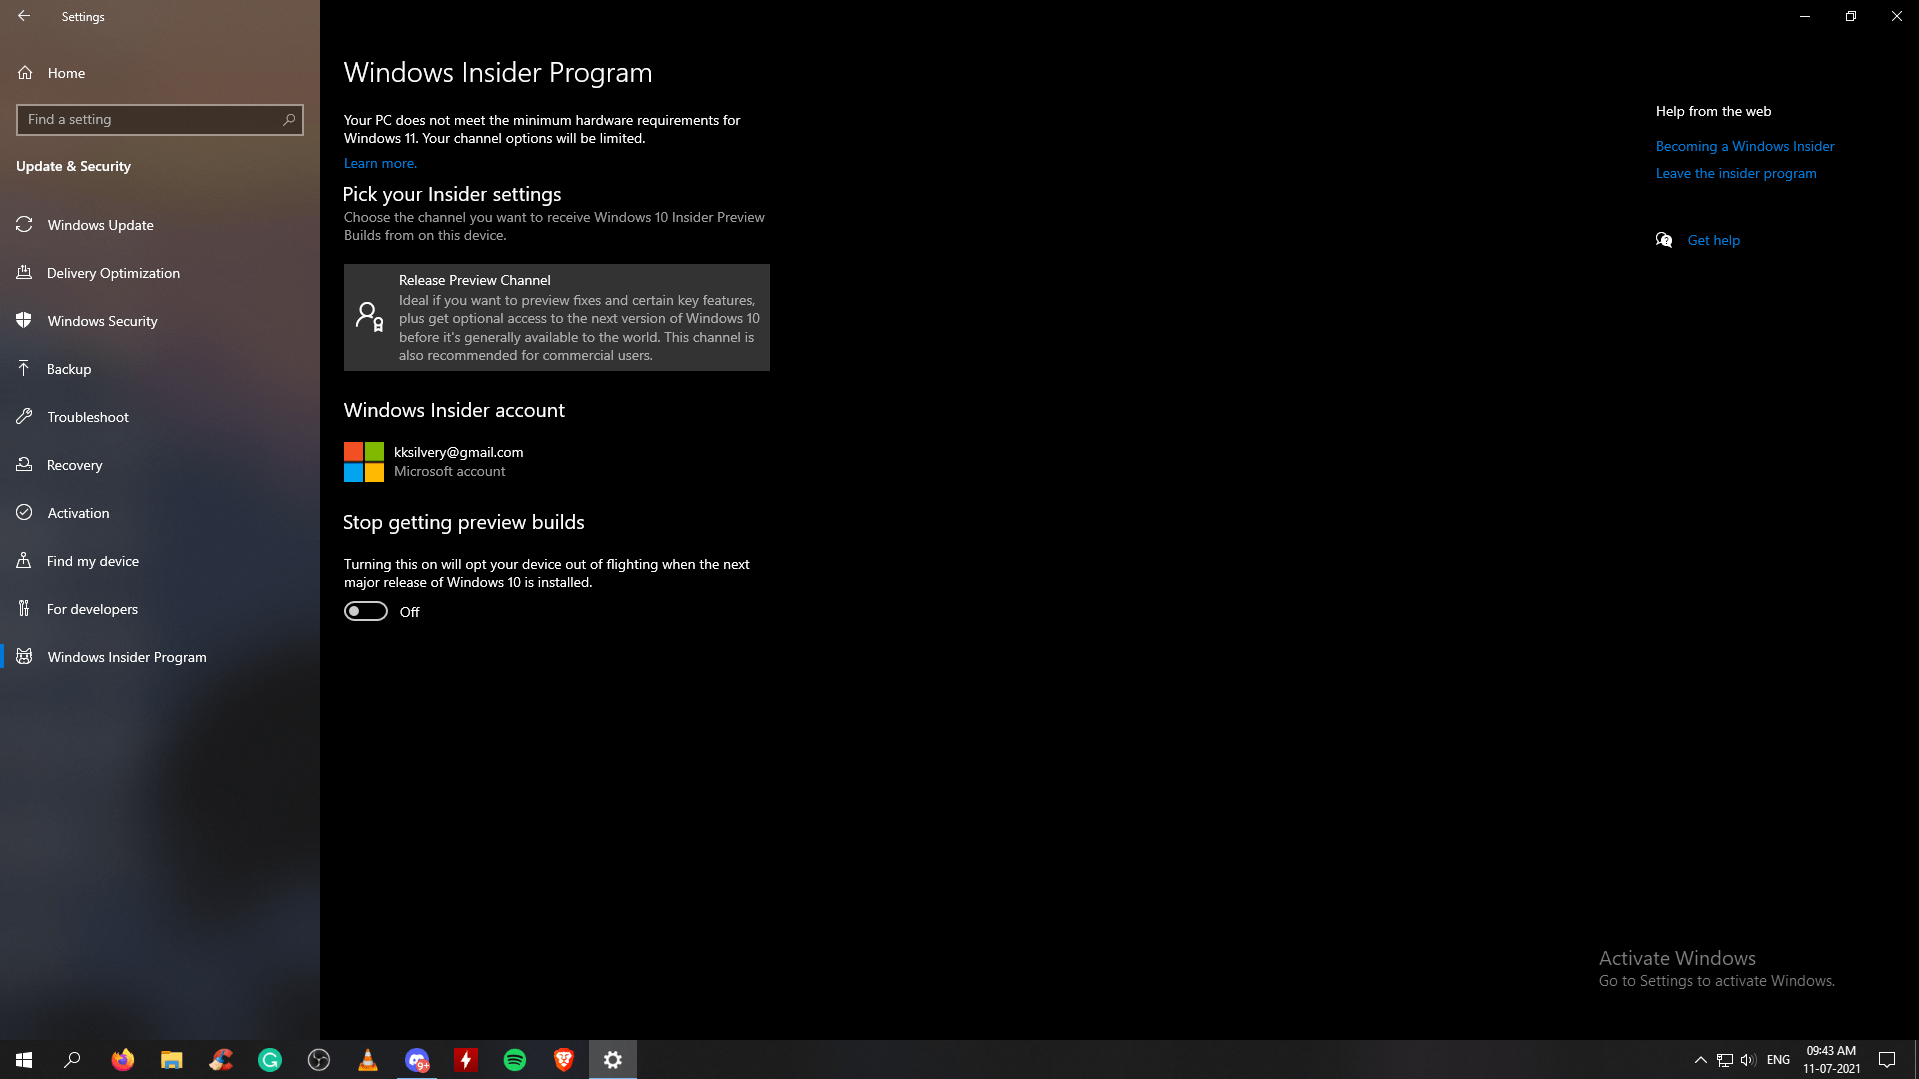 Open “Windows Insider Program” and click on “Release Preview Channel.”